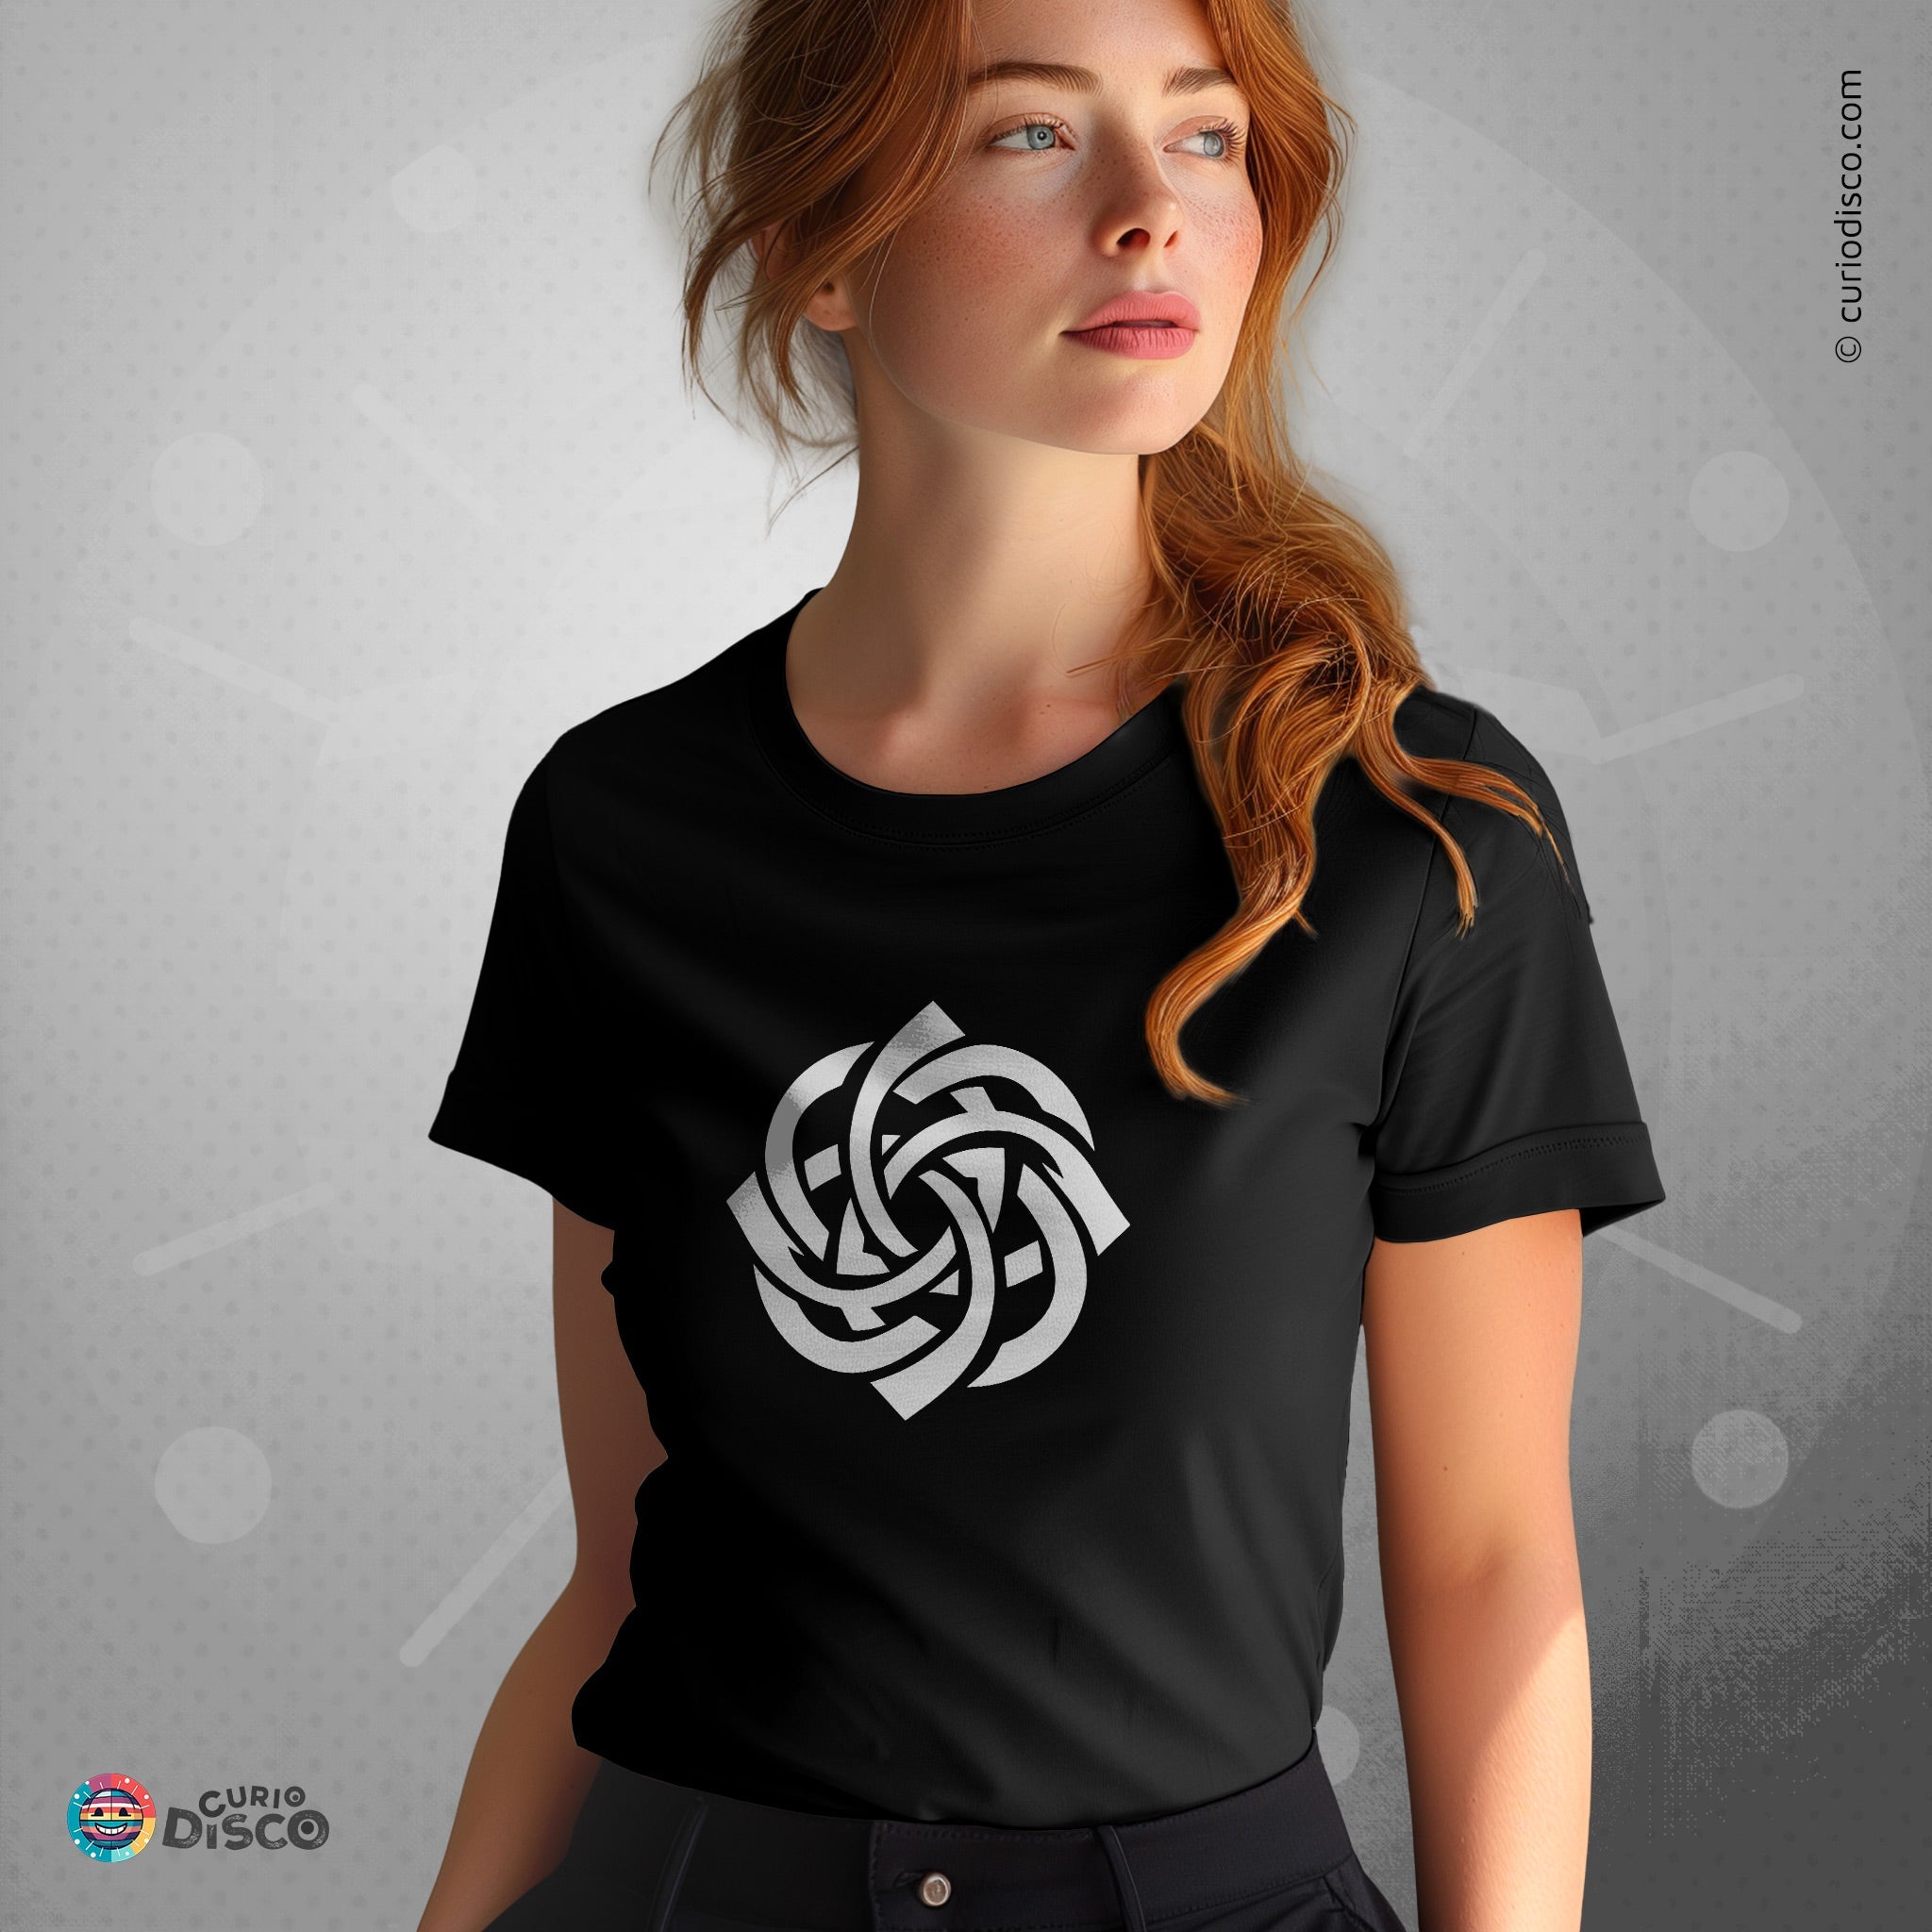 Black tree of life yoga shirt with celtic knot, ideal as love knot viking nordic celtic gifts, gifts for wife, yoga gifts for her, plus size clothing for mystical cottage core workout, and gifts for mom.